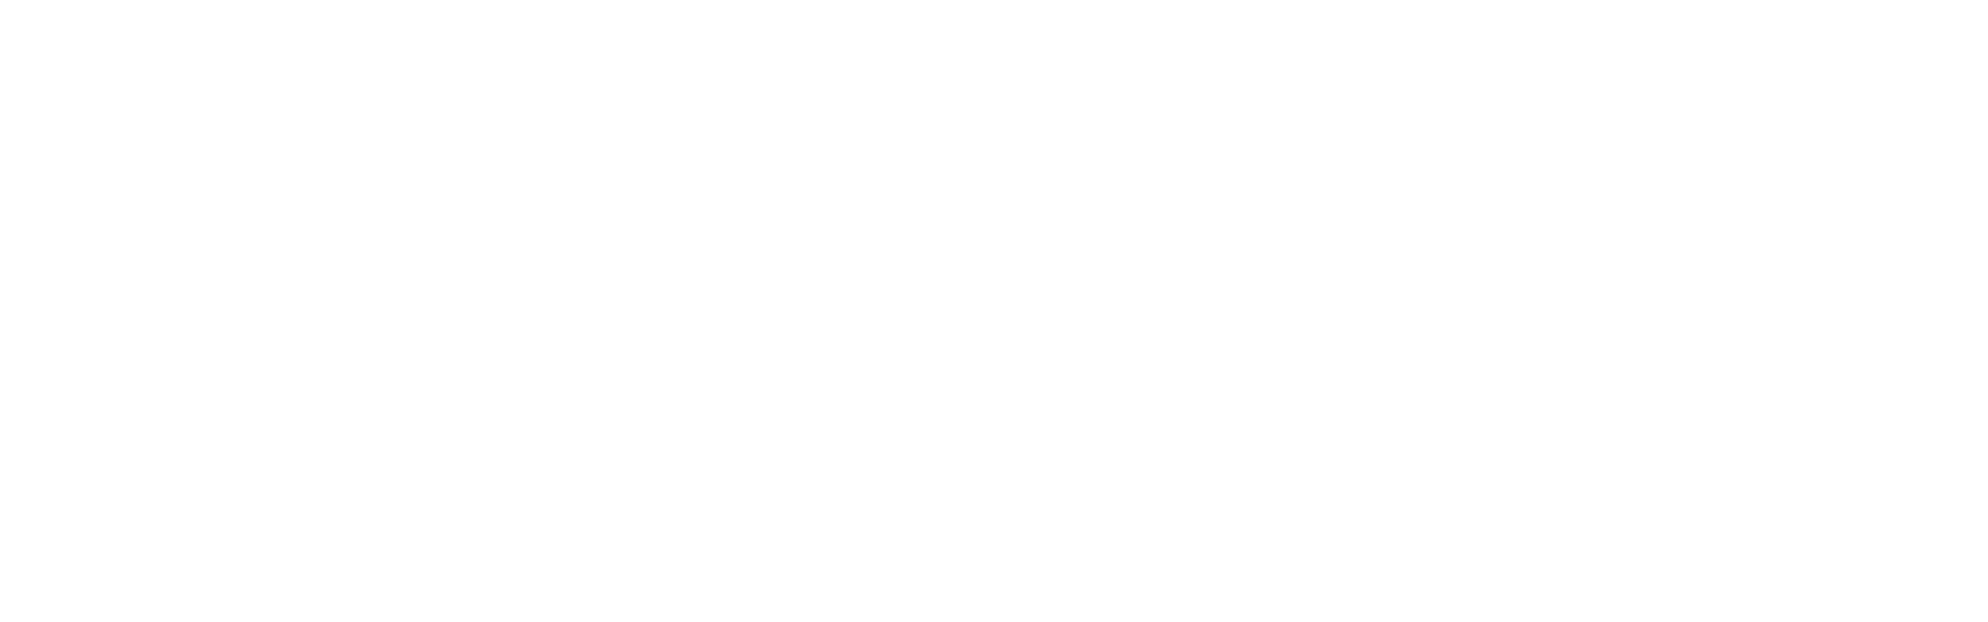 OpenFF Toolkit 0.16.0+2.g13ca029.dirty documentation logo